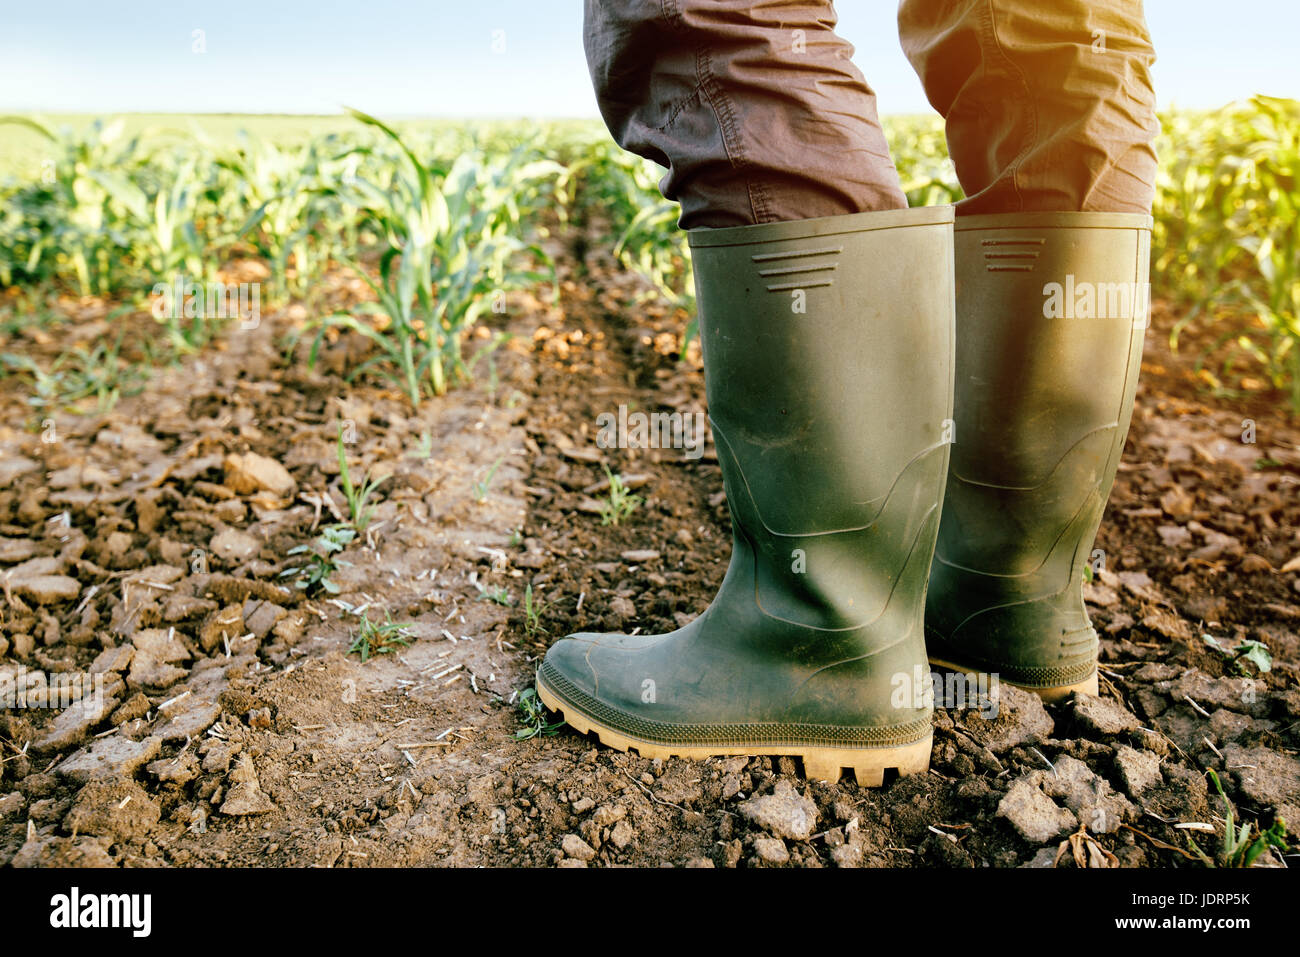 Farmer in rubber boots standing in the field of cultivated corn maize crops Stock Photo